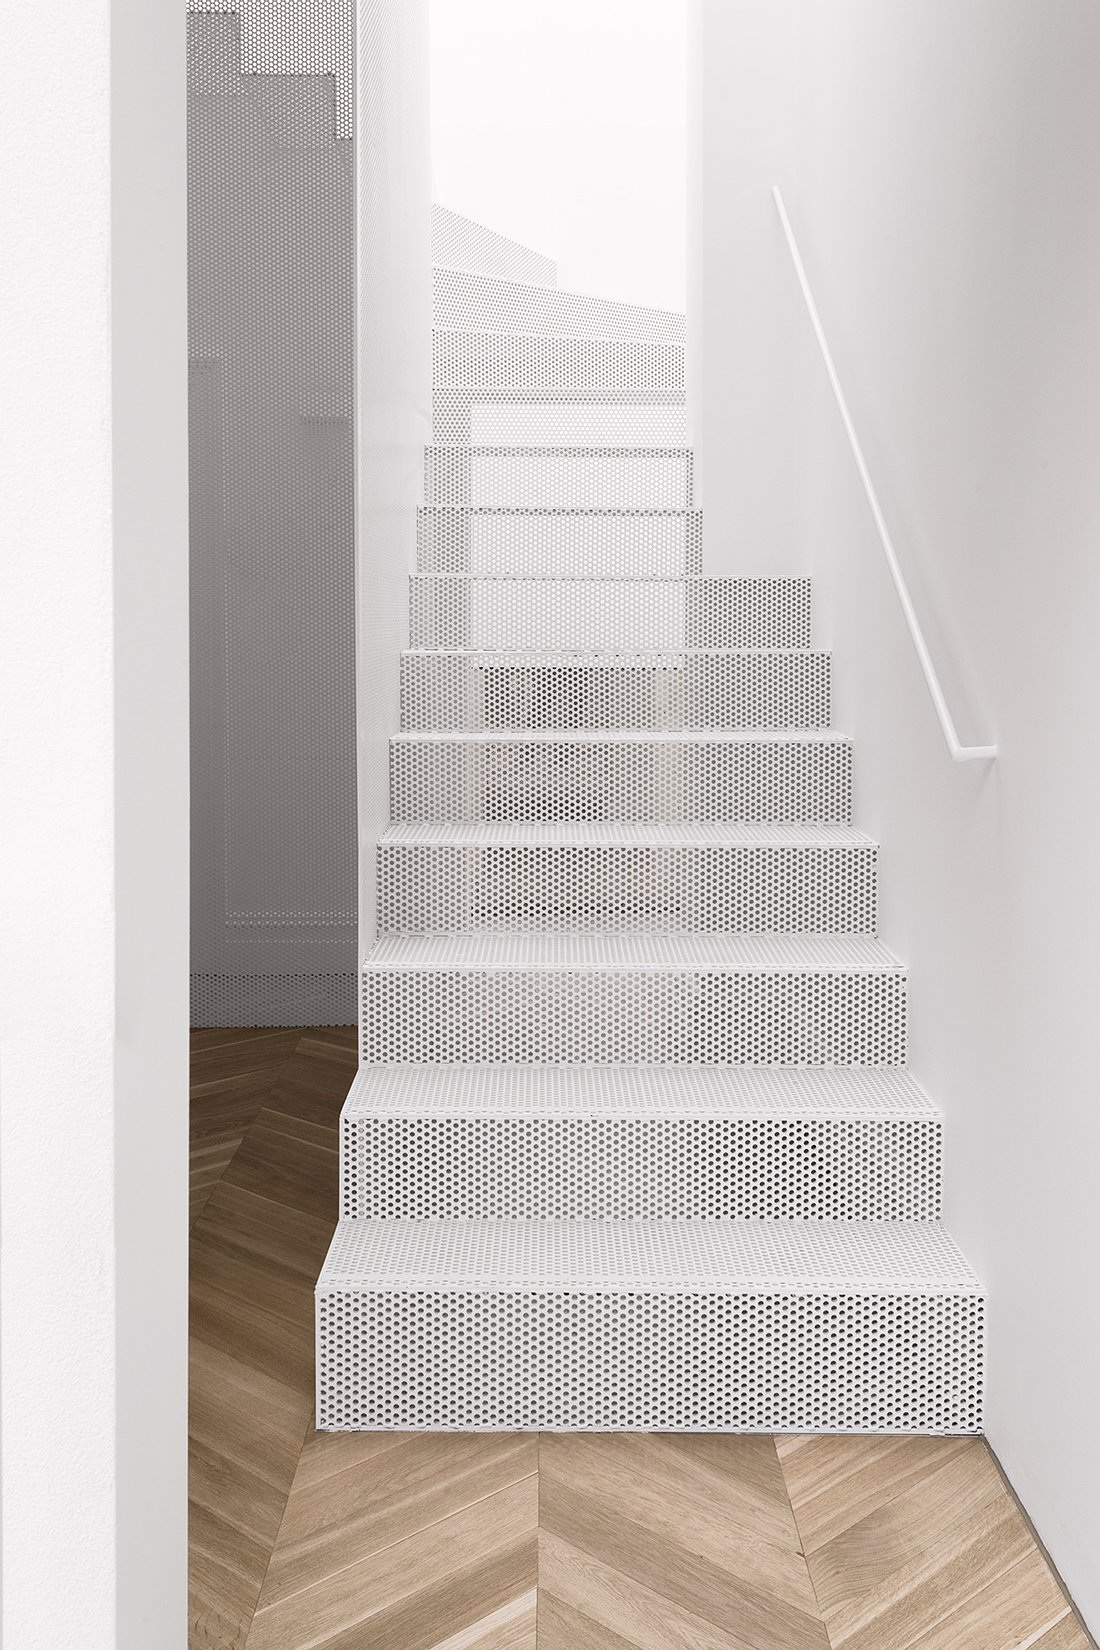 Perforated Metal Staircase by Renato D'Ettorre